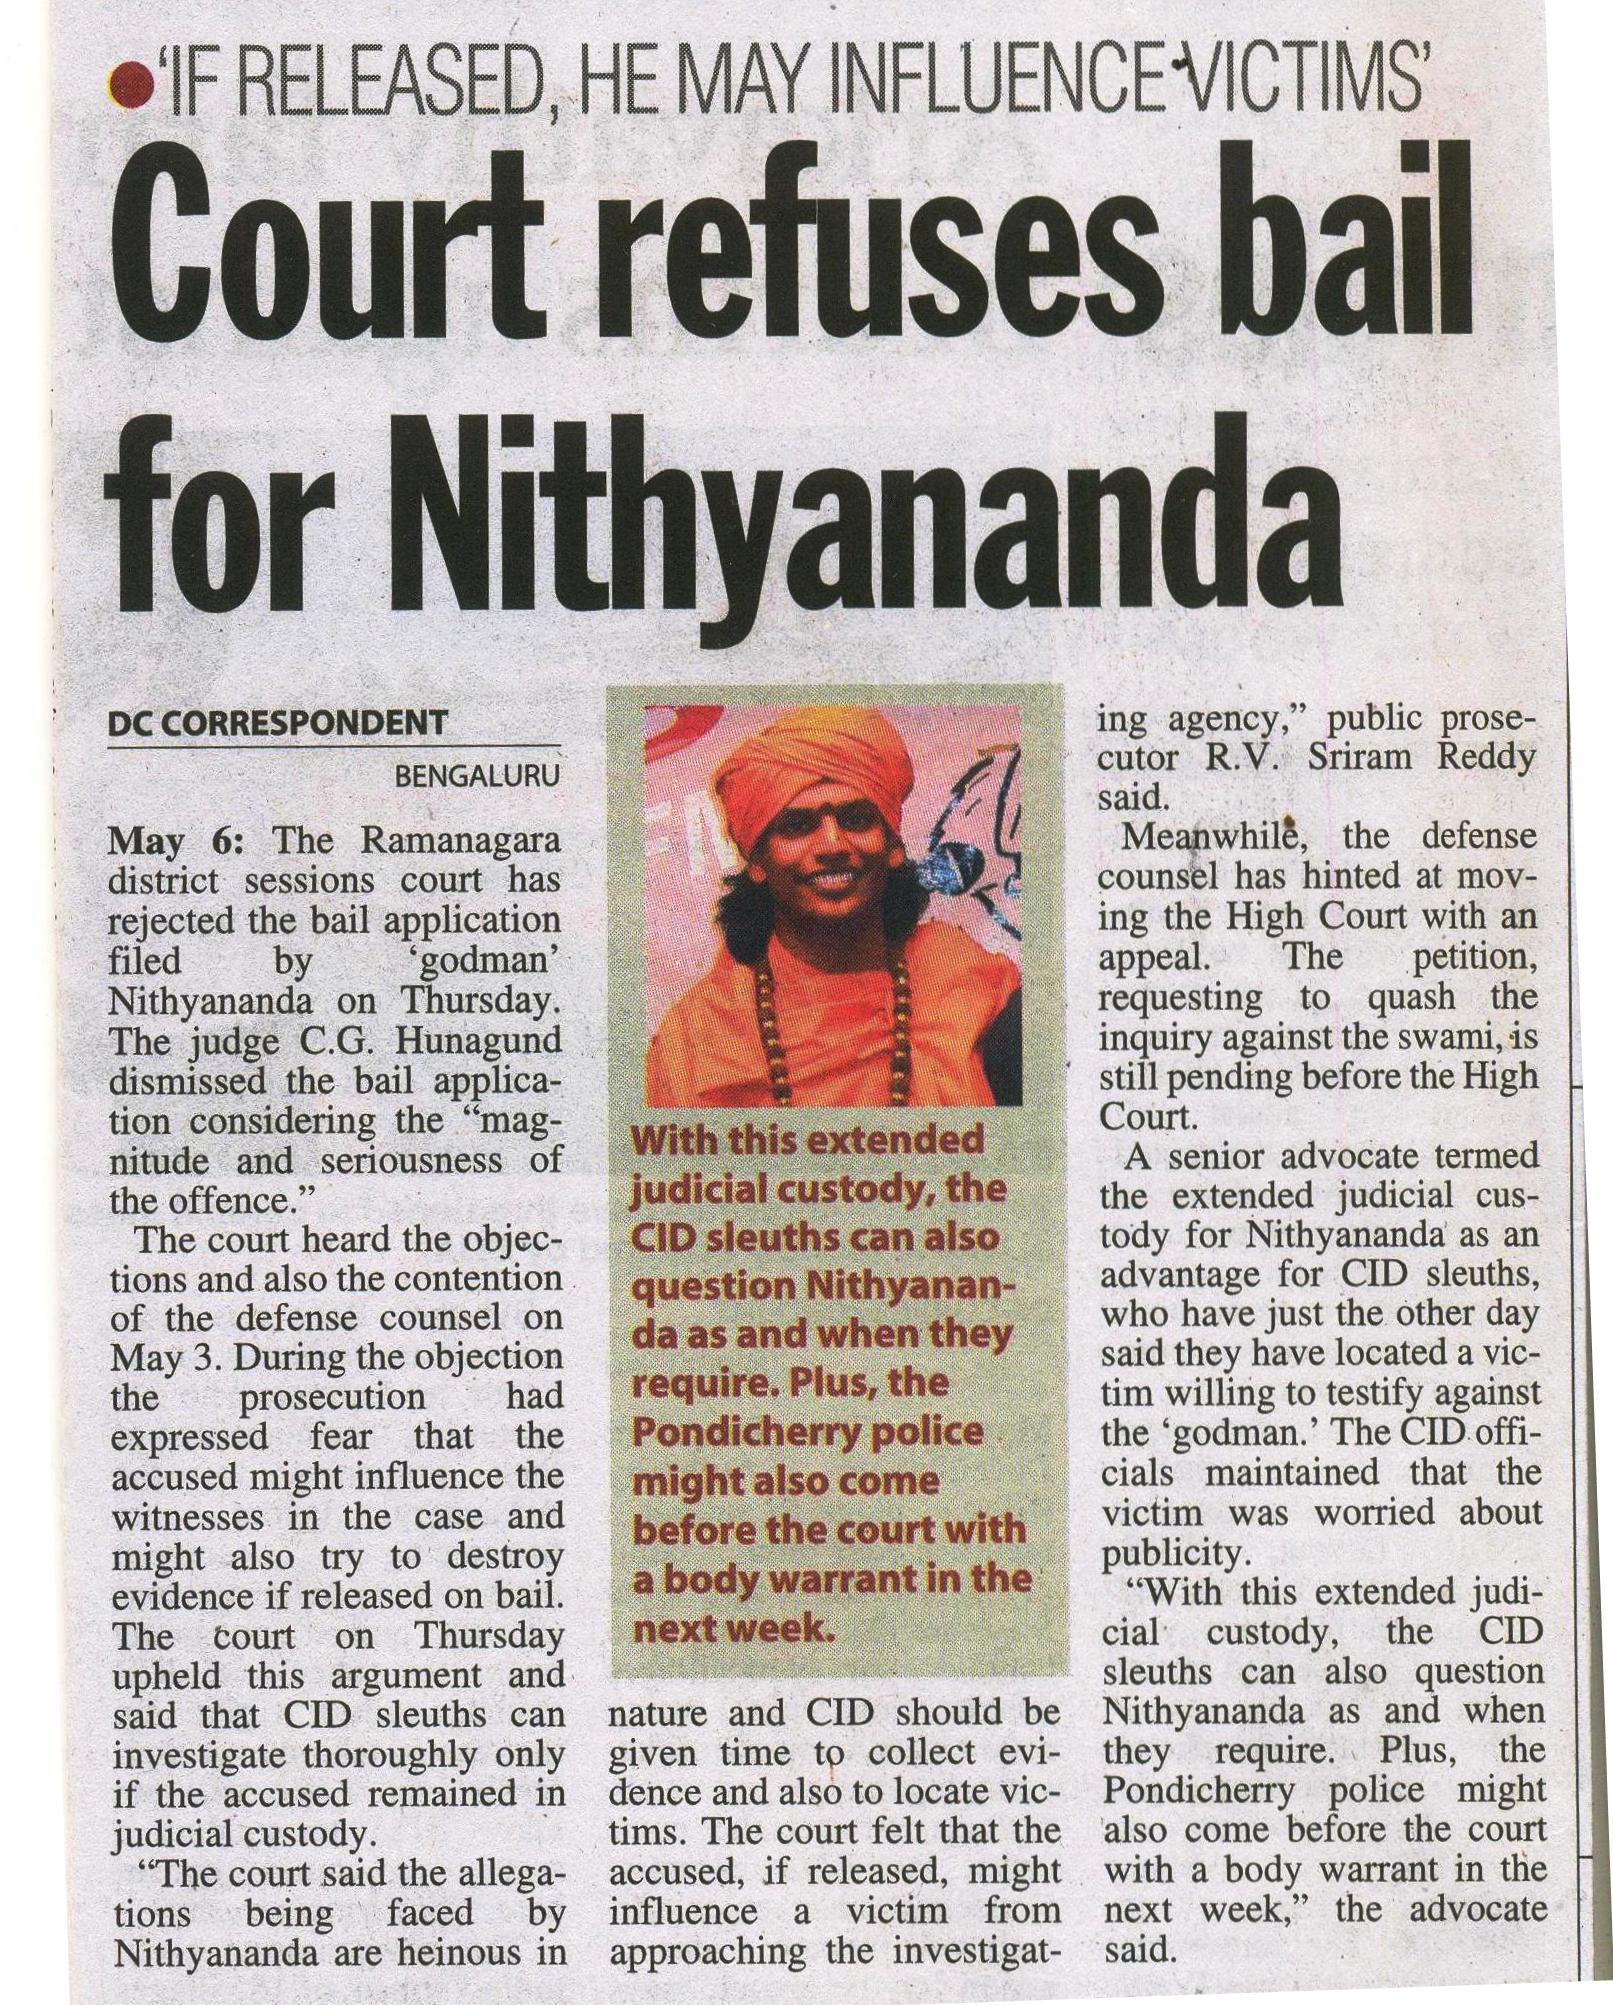 Deccan Chronicle_May 7 2010_Pg 3_Court refuses bail for Nithyananda_Bangalore